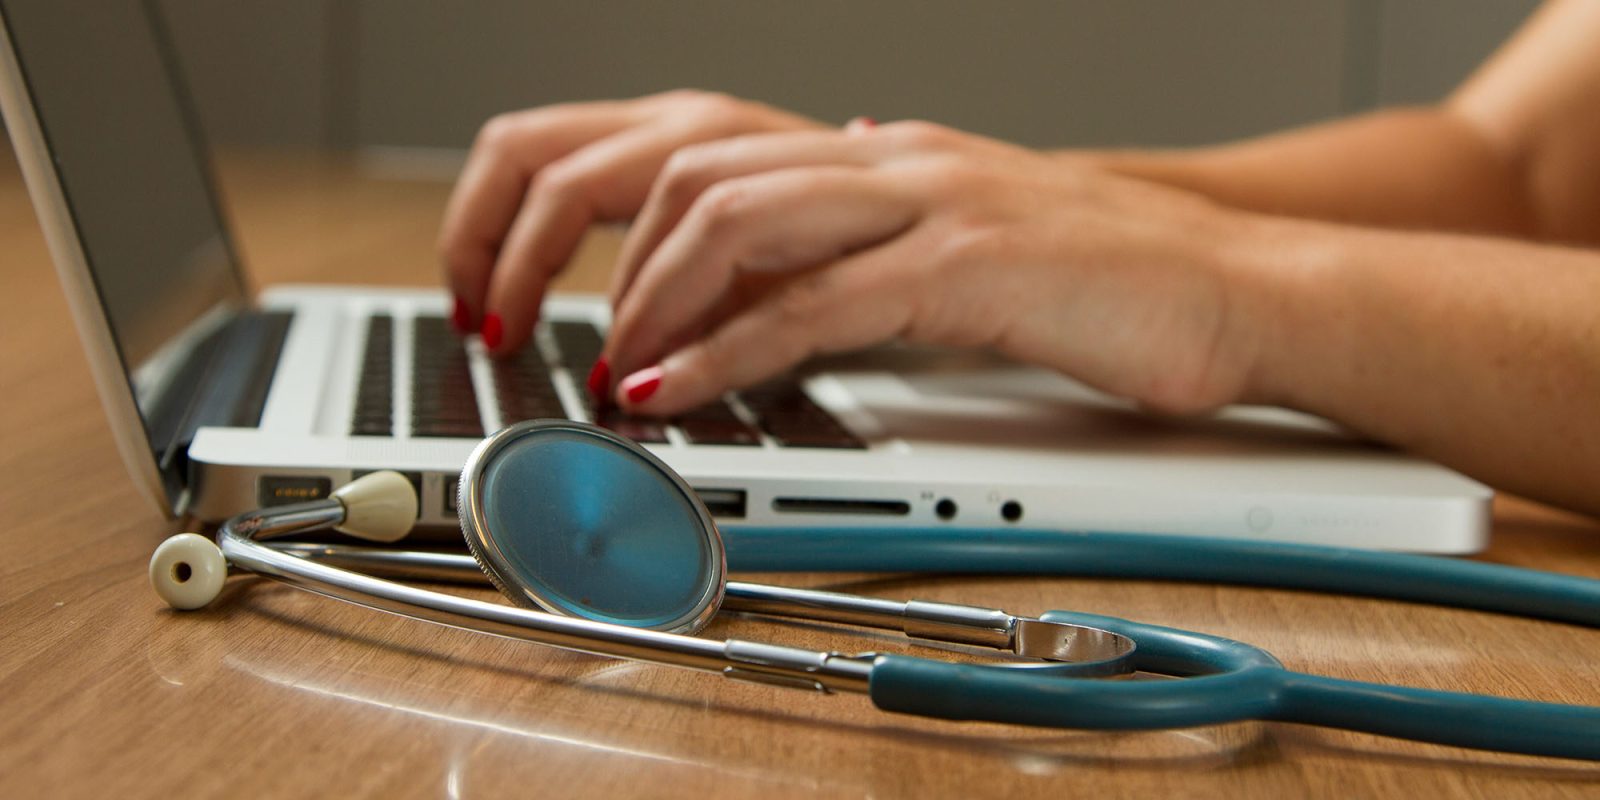 Doctors prescribing app, with walking steps targets | Typing on Mac next to stethoscope